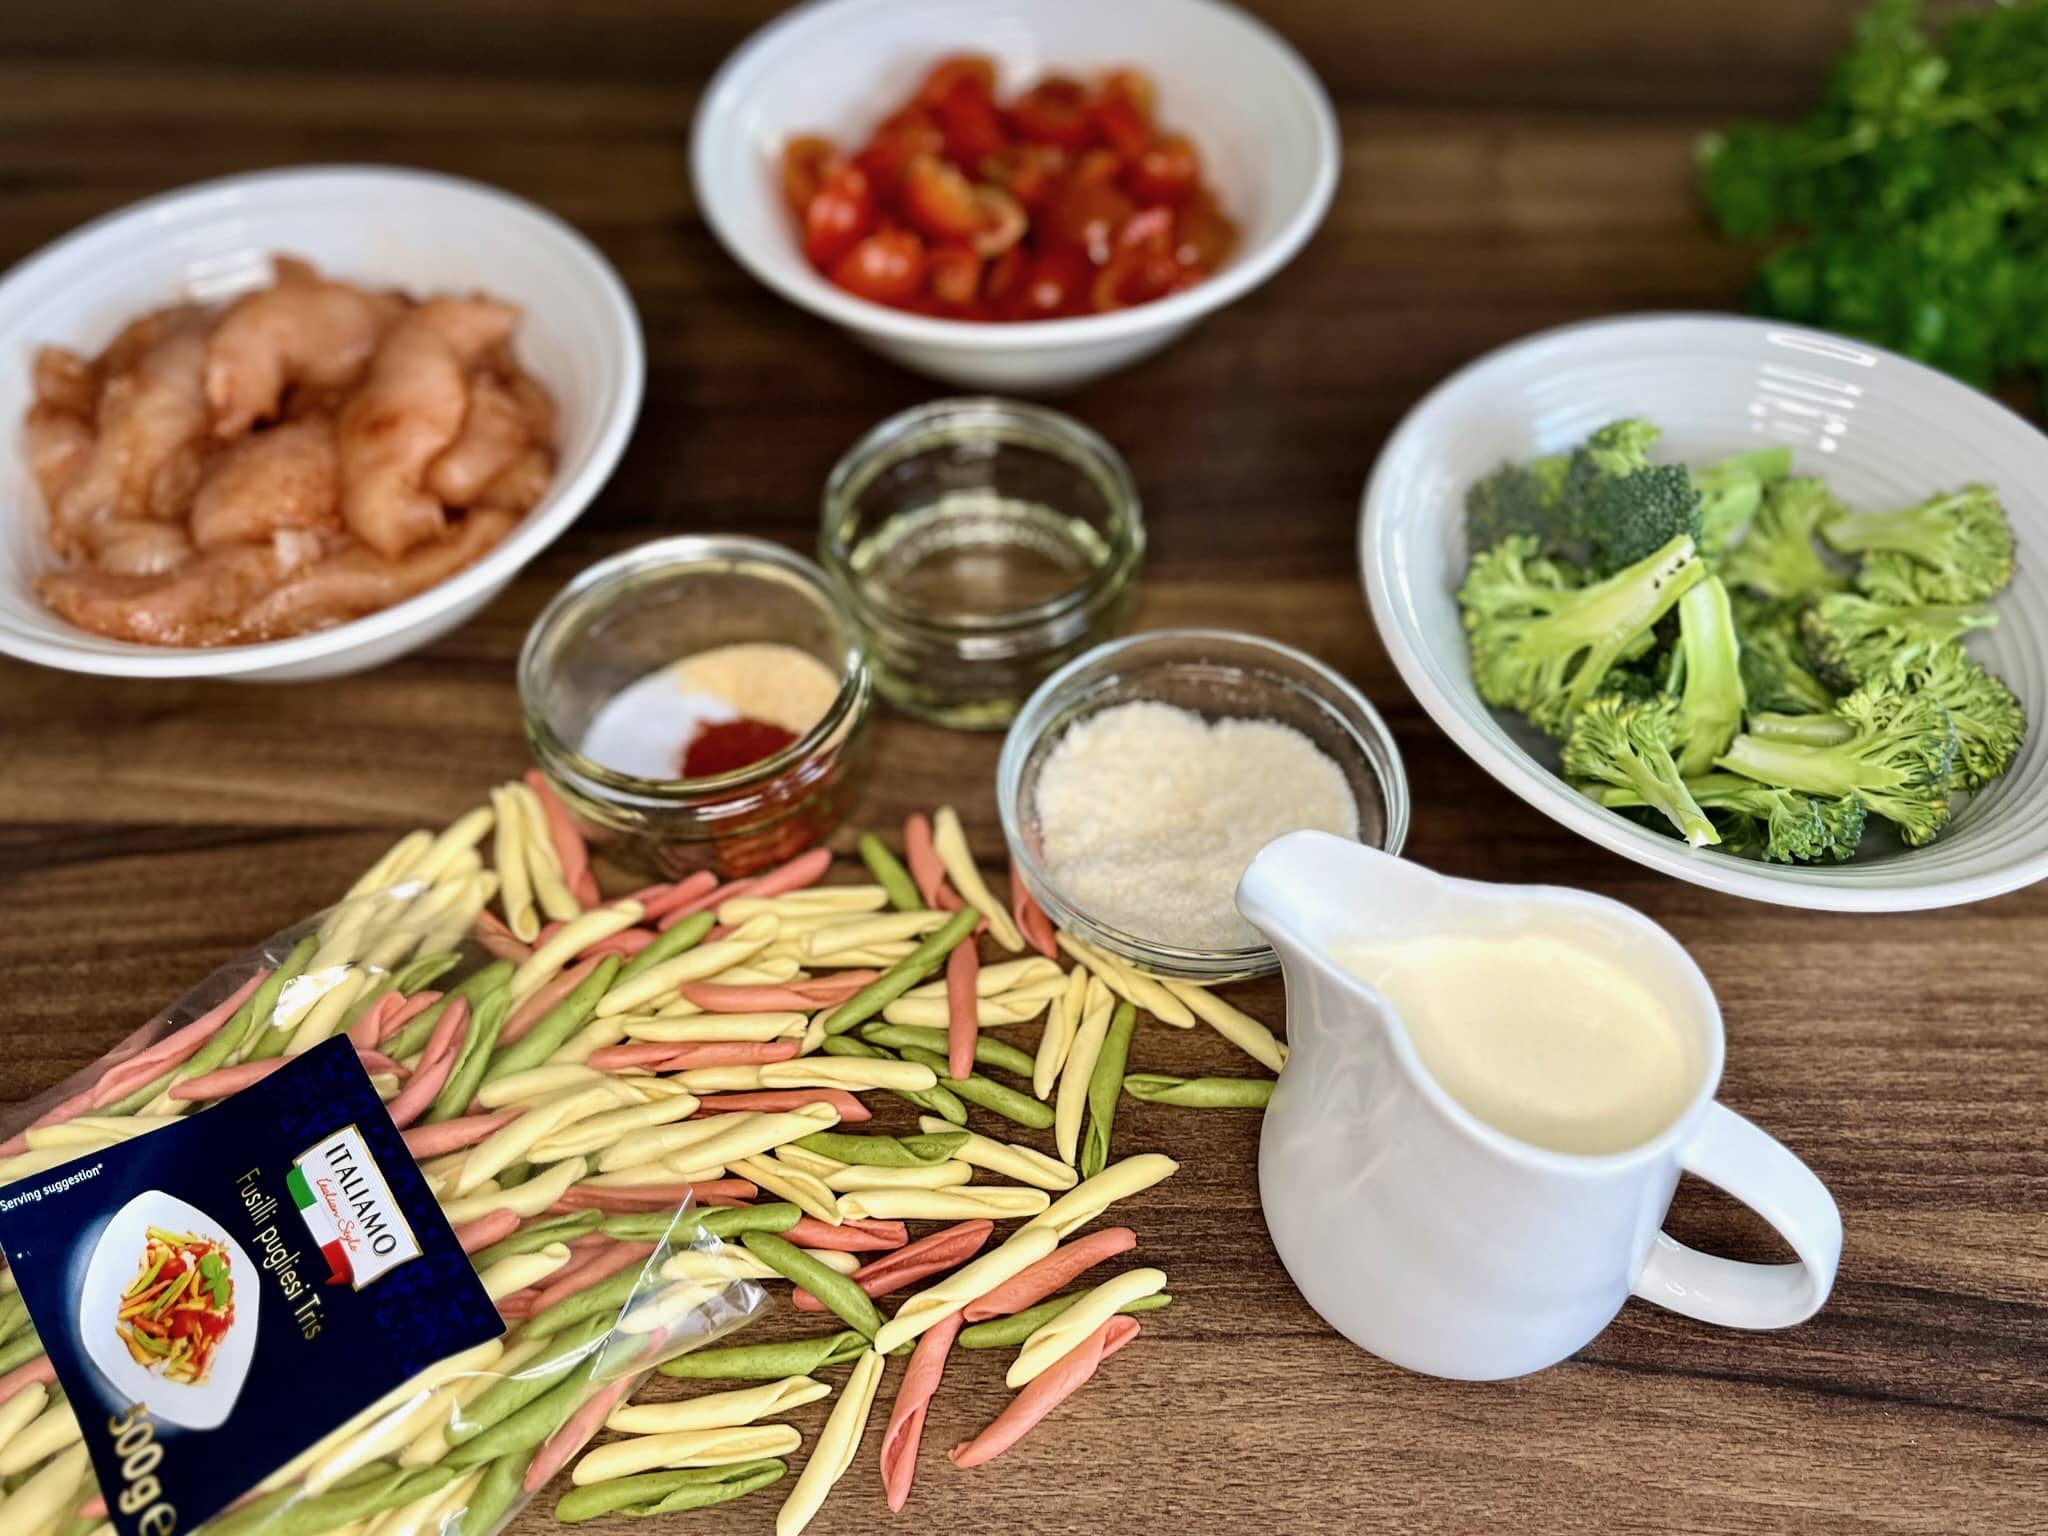 The ingredients for Creamy Chicken Pasta with Cherry Tomatoes are all laid out on the kitchen table, ready to be cooked.